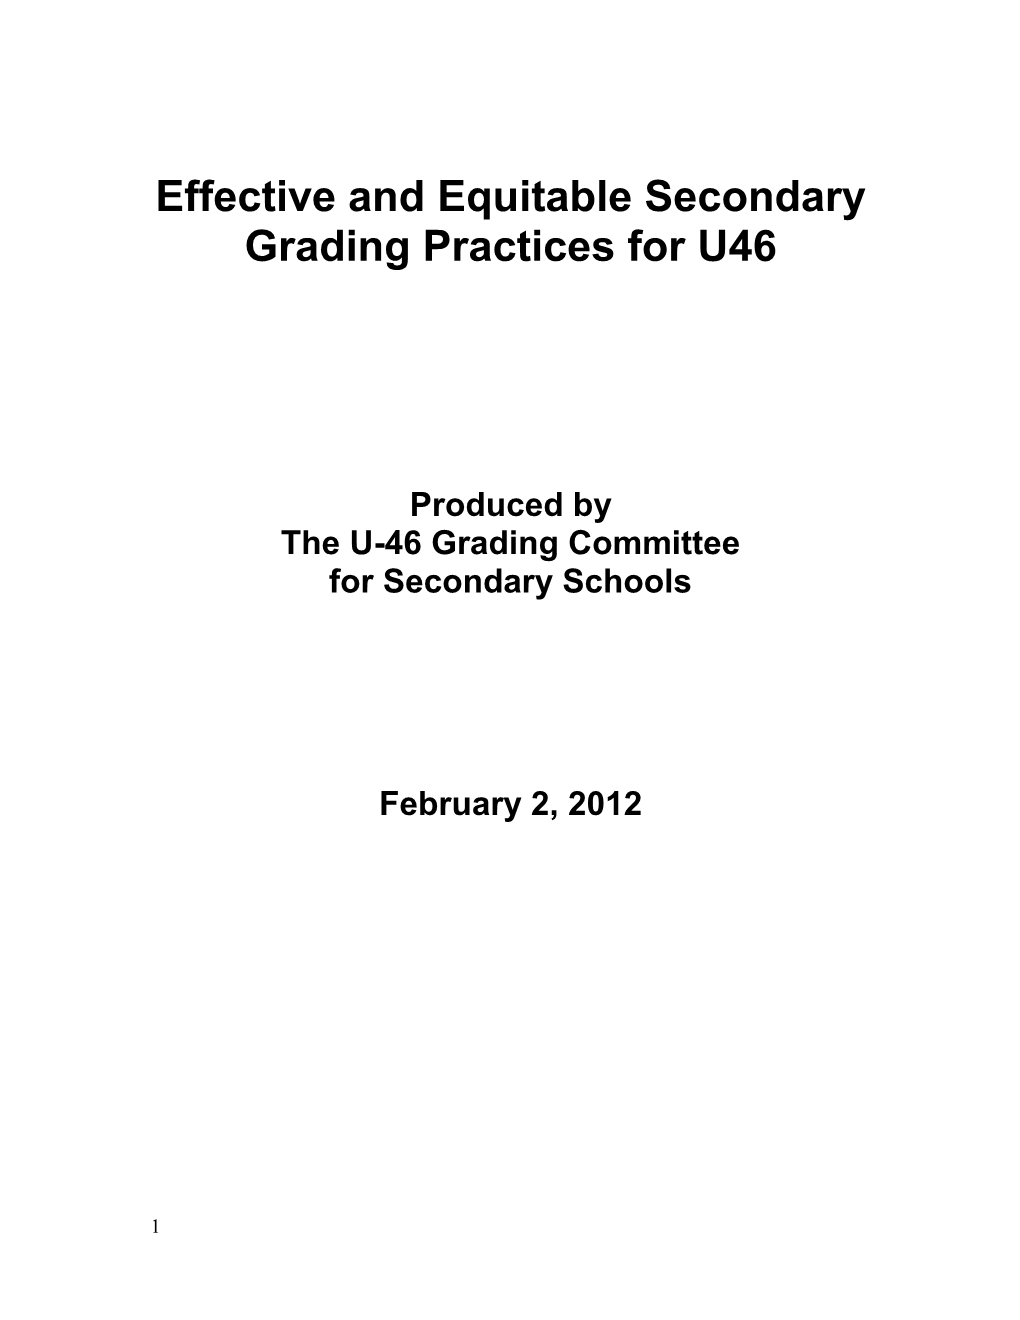 Effective and Equitable Secondary Grading Practices for U46